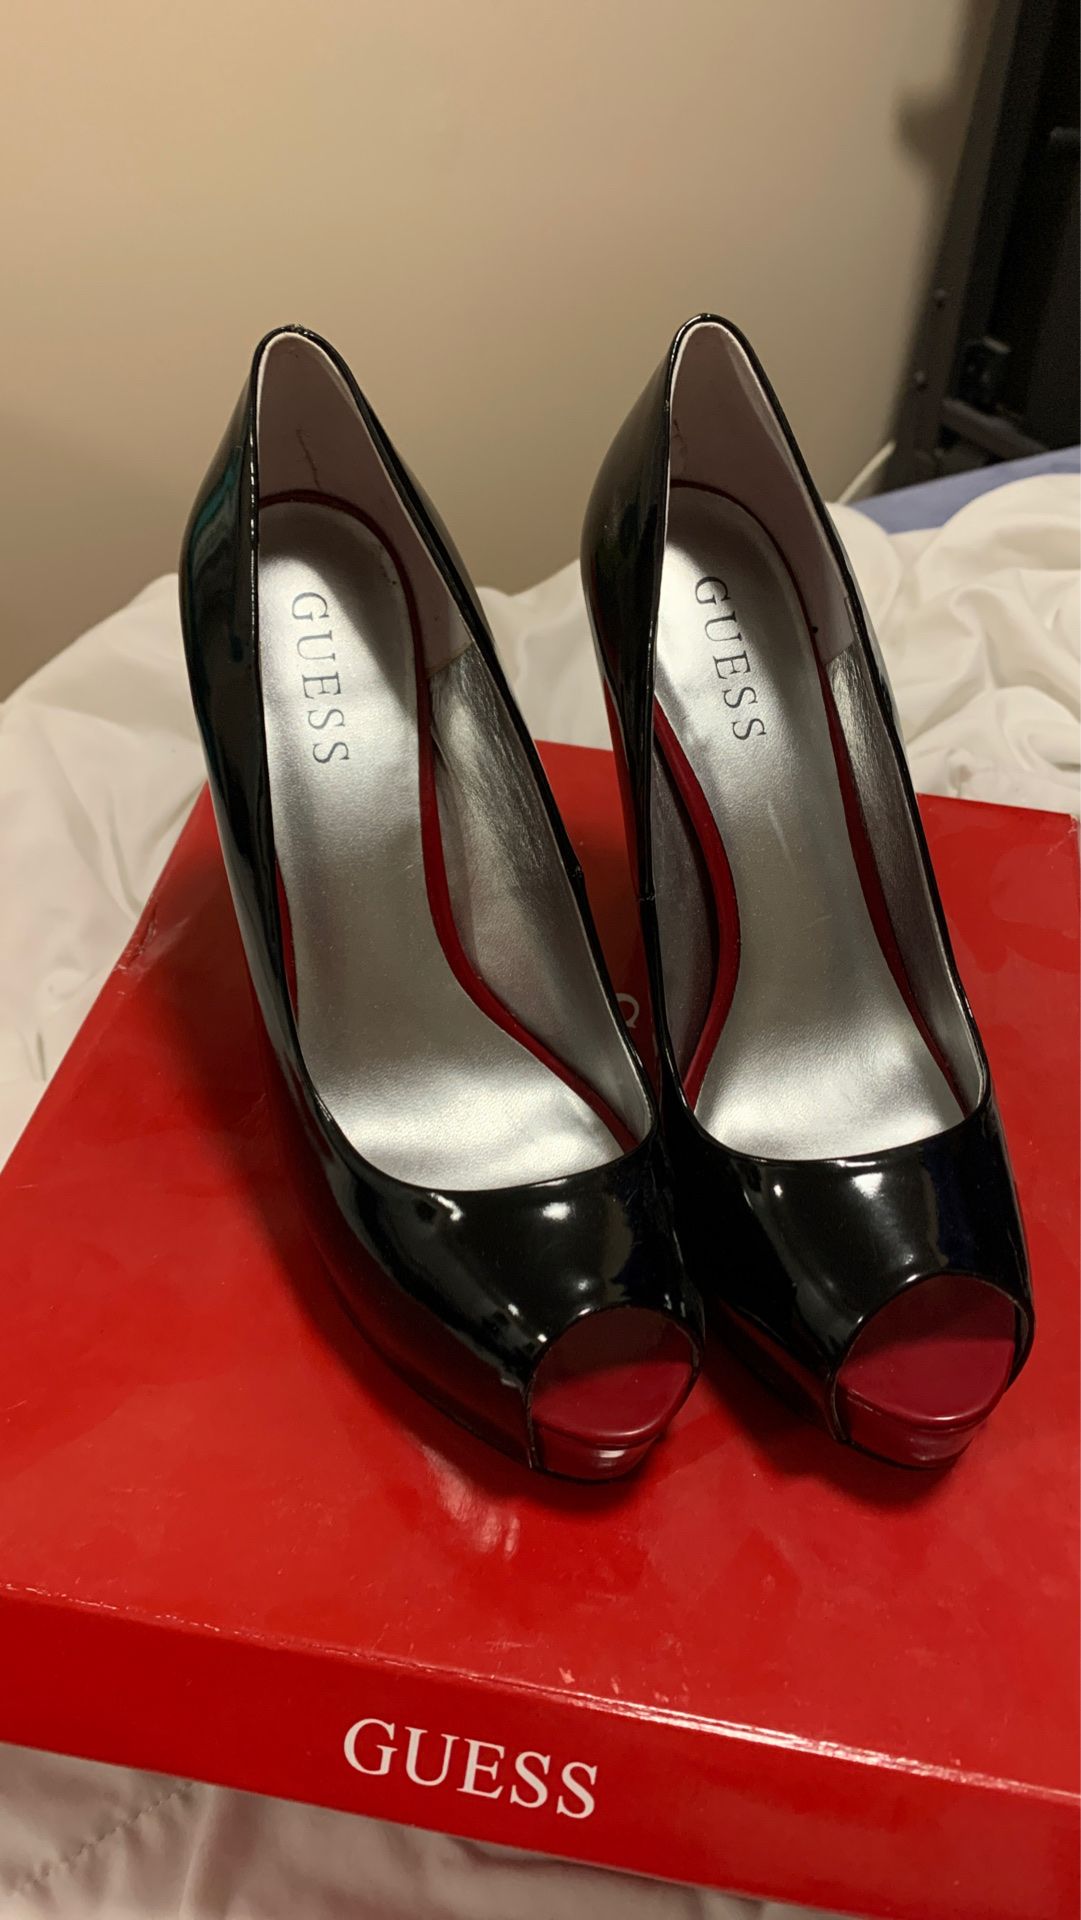 Guess Red and Black Heels Size 6.5